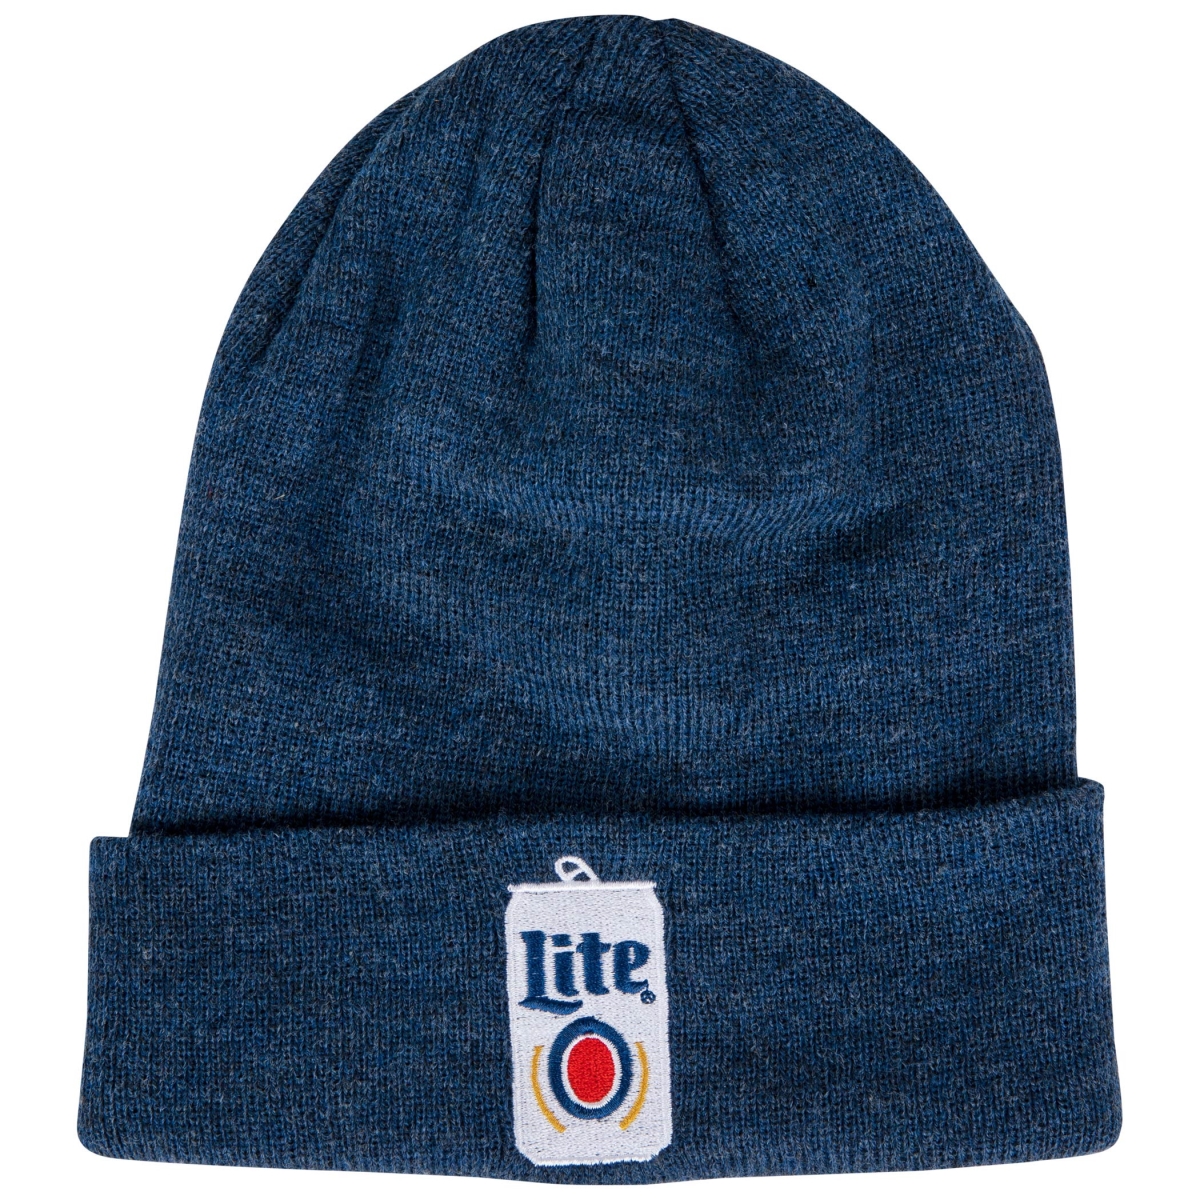 Picture of Miller Lite 830454 Can Knit Cuff Beanie